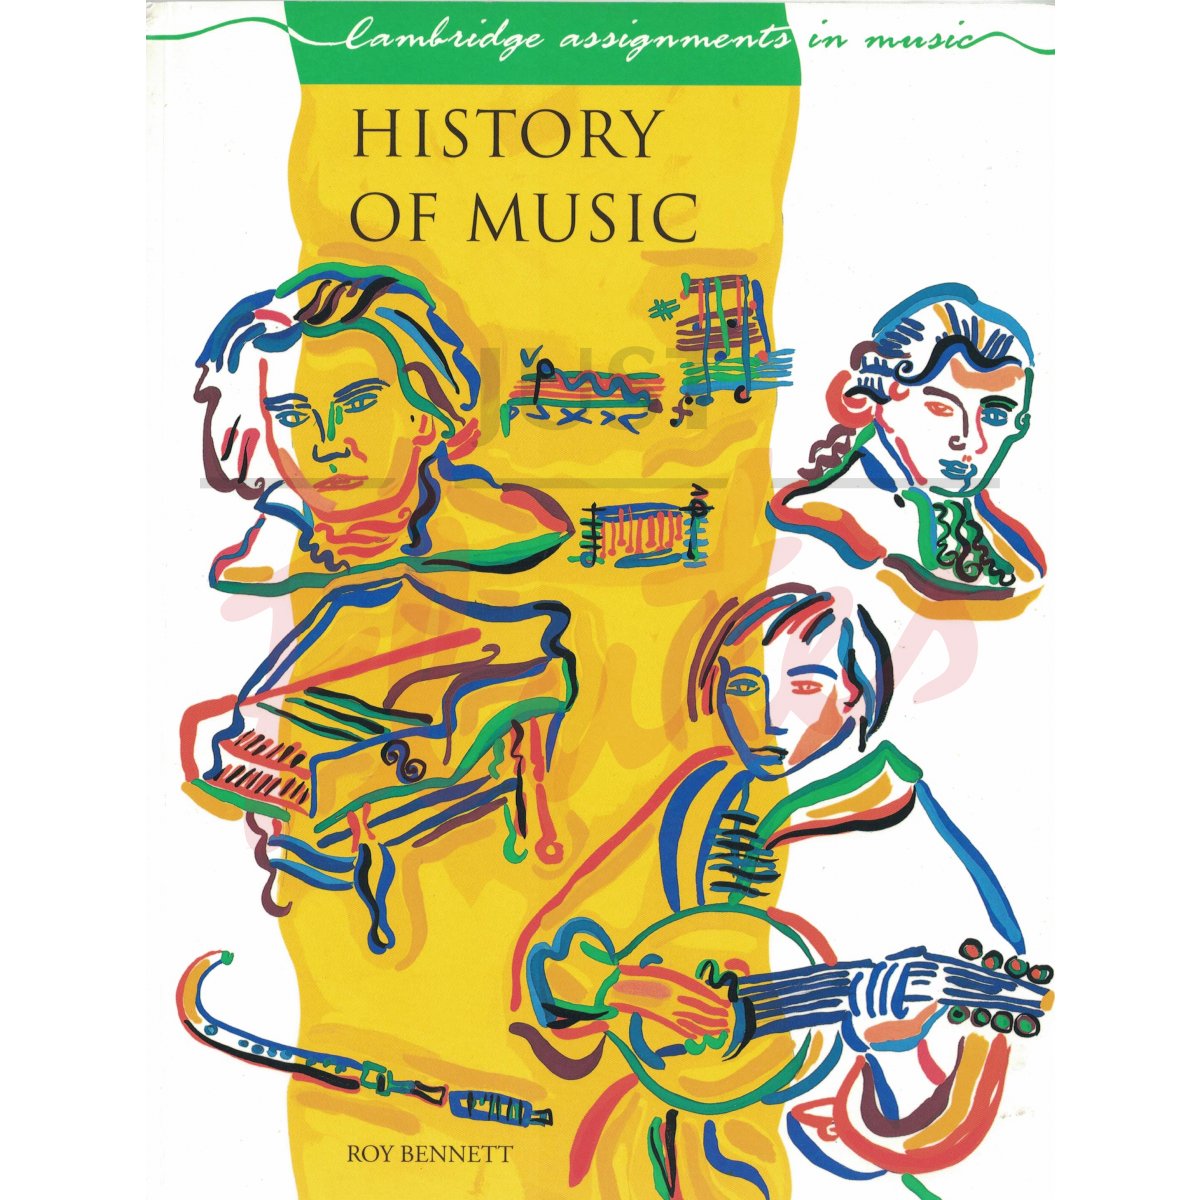 History of Music (Cambridge Assignments)